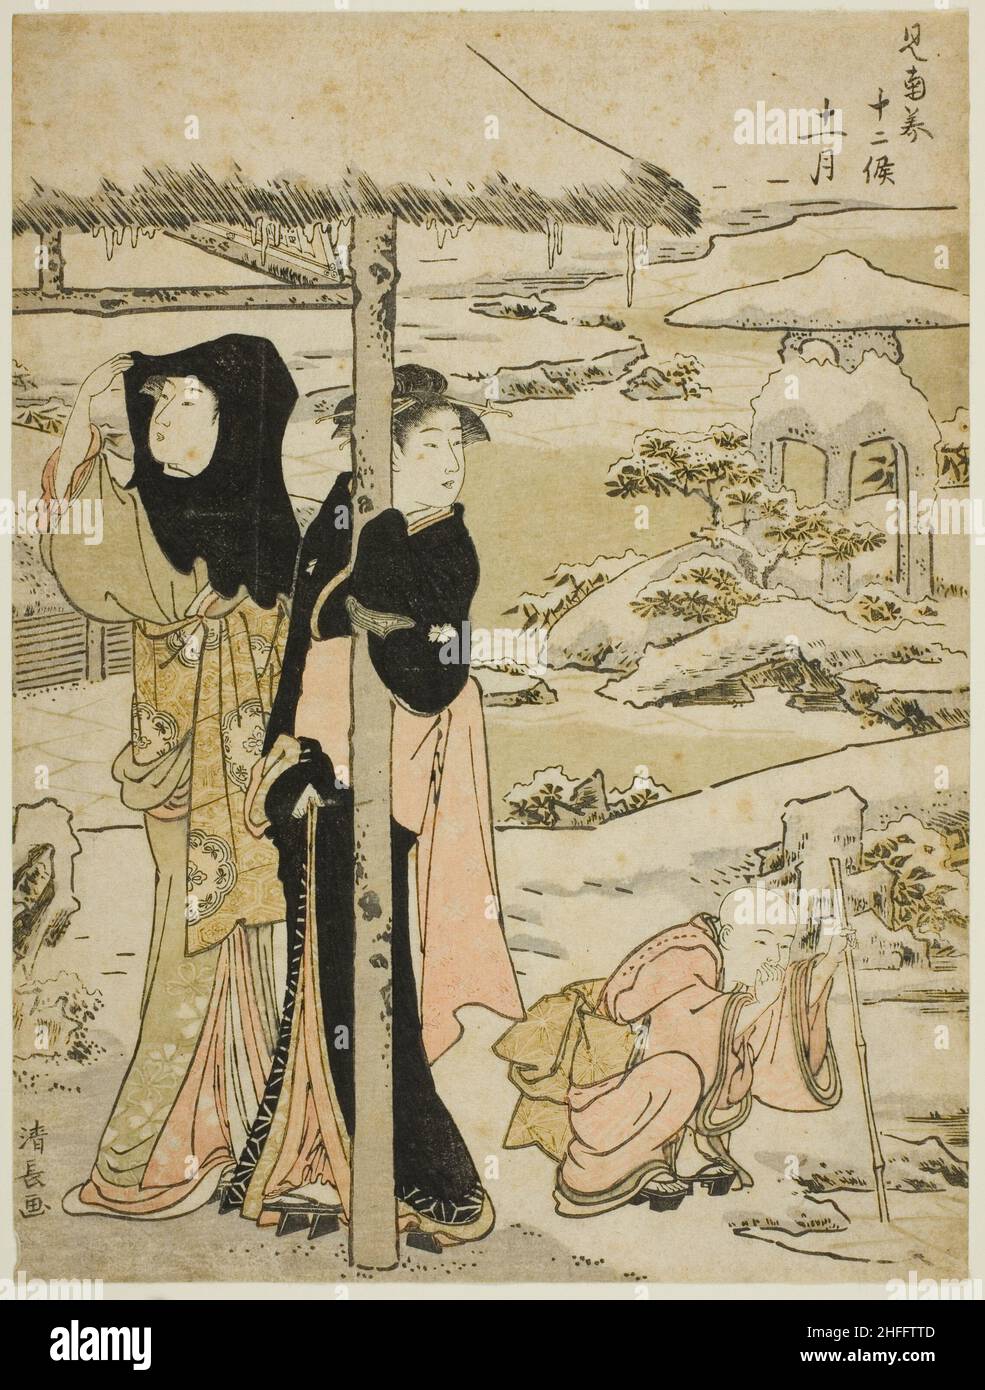 The Eleventh Month (Juichigatsu), from the series &quot;Twelve Months in the South (Minami juni ko)&quot;, c. 1783/84. Stock Photo